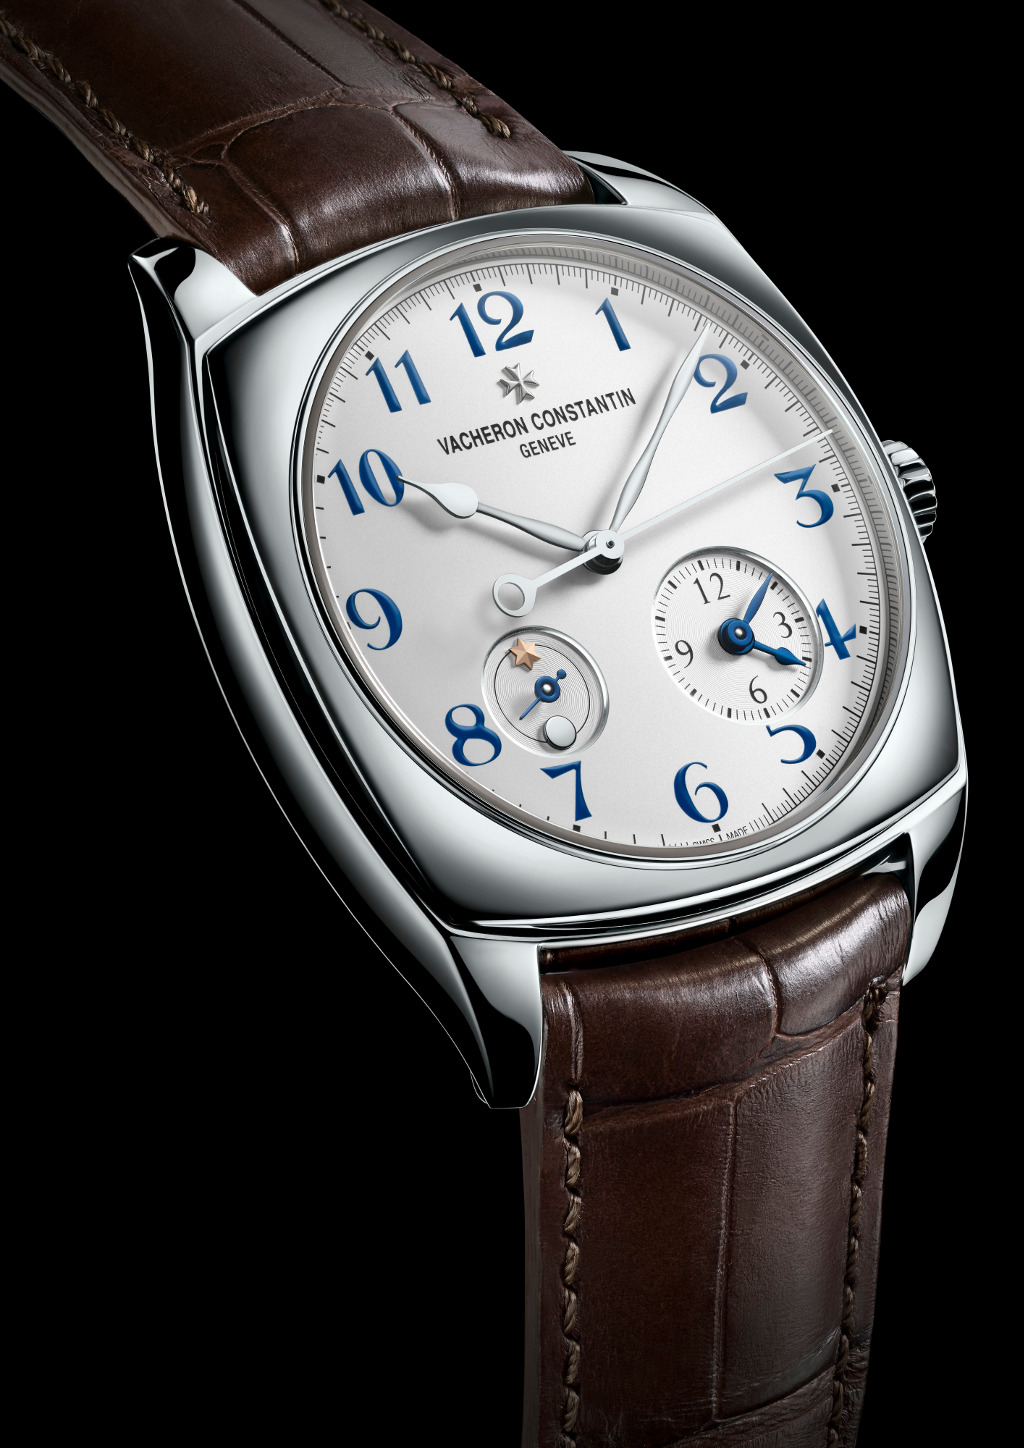 The Vacheron Constantin Harmony Dual Time in white gold.